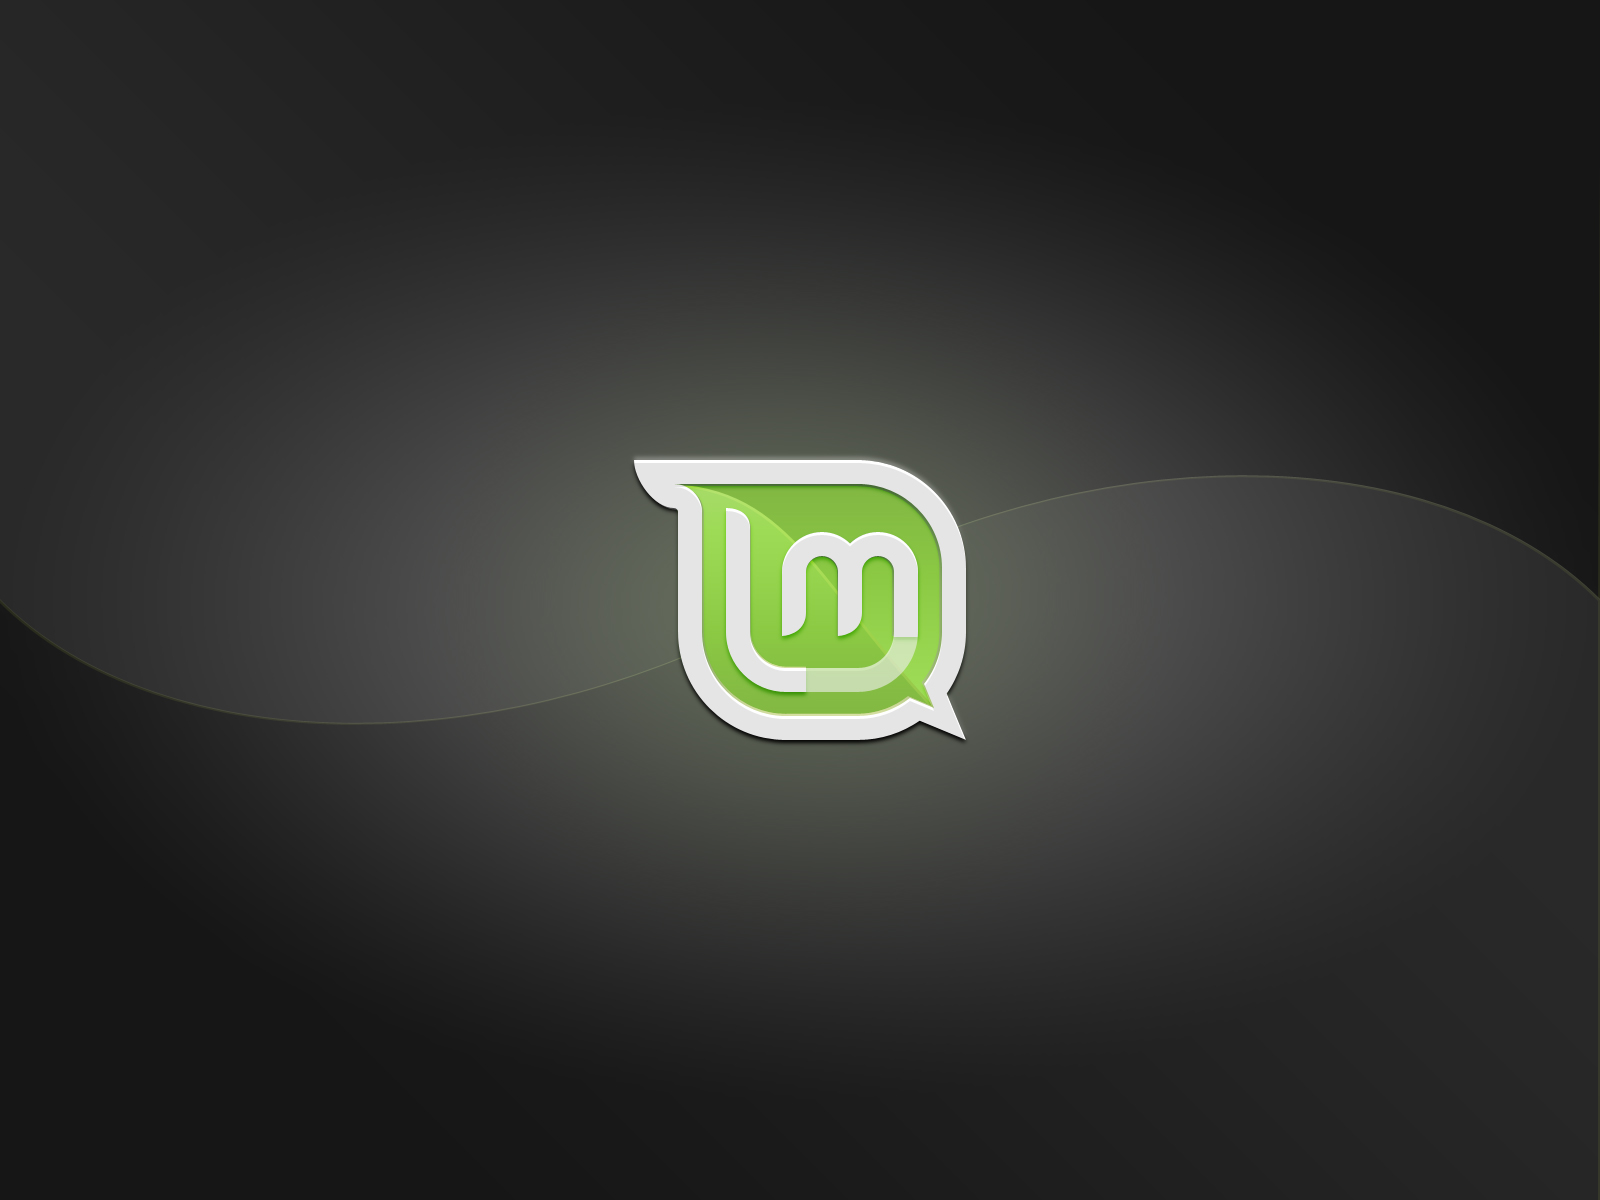 Related For Linux Mint Wallpaper